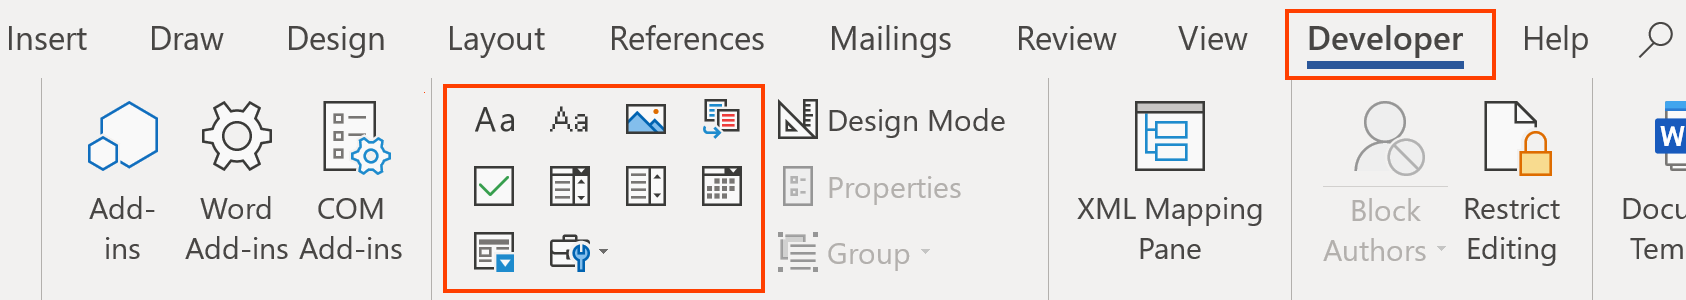 Content controls in Developer tab in Microsoft Word